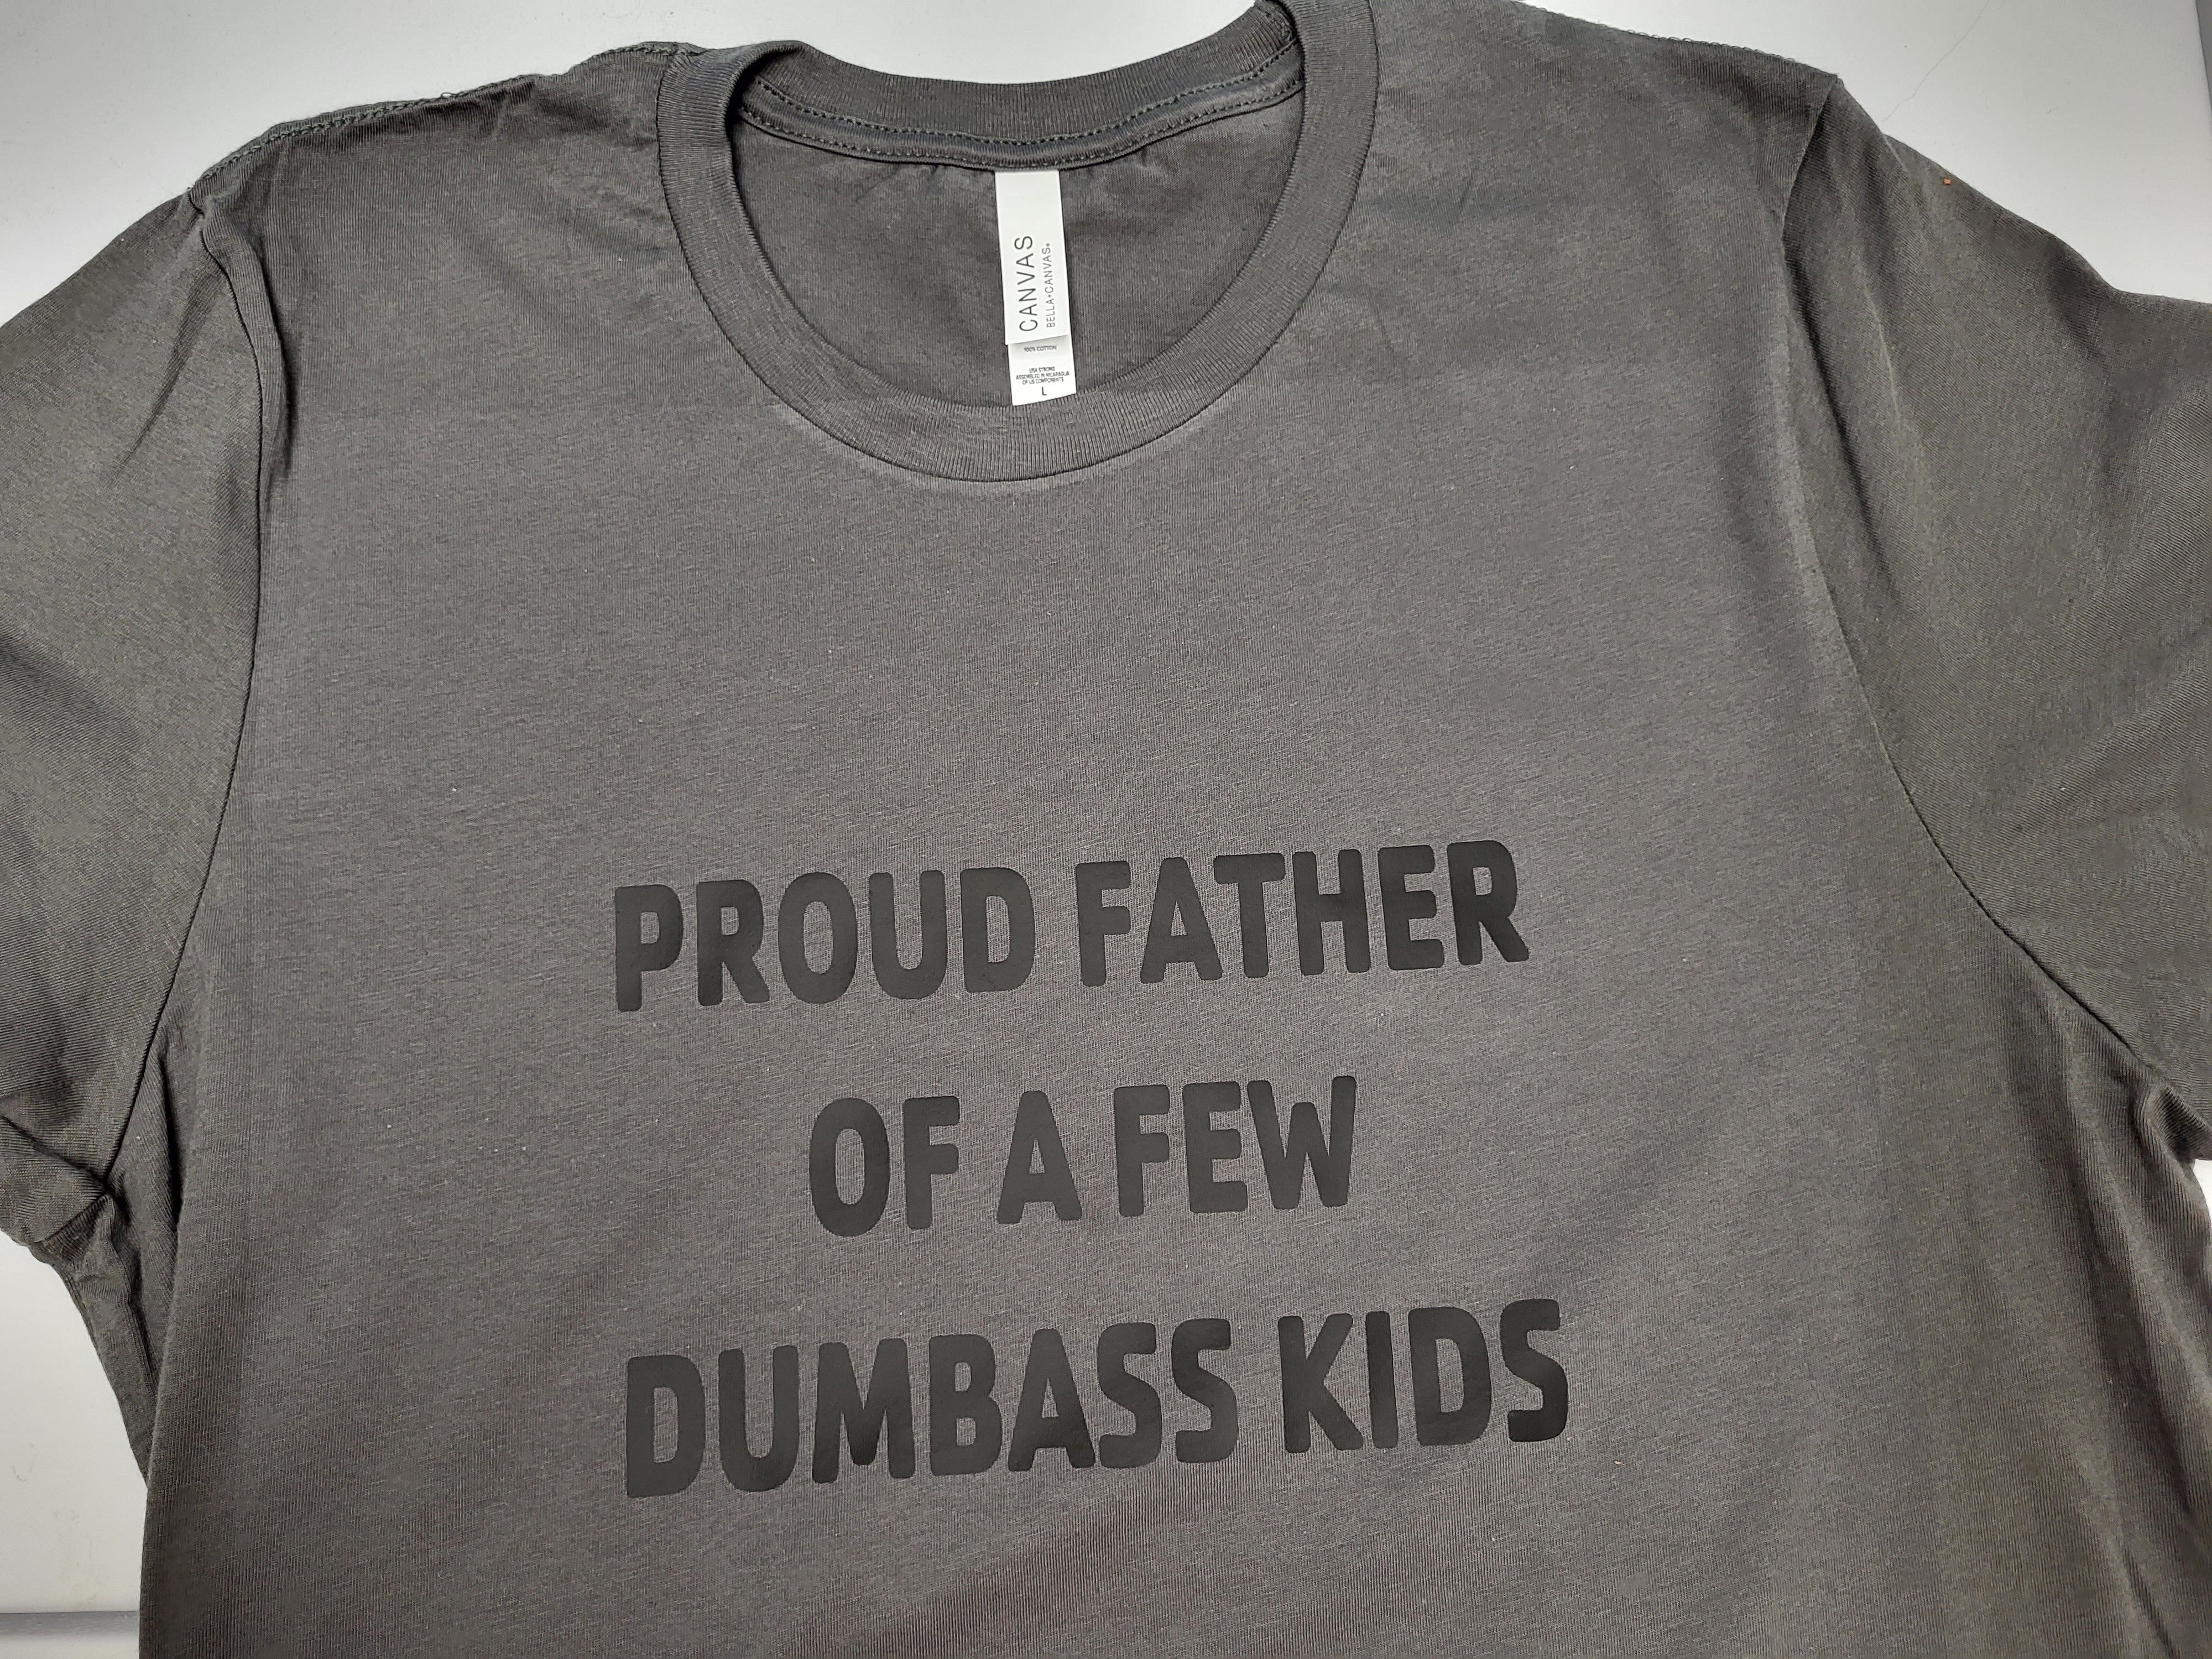 Proud father | Fathers Day | T-shirt